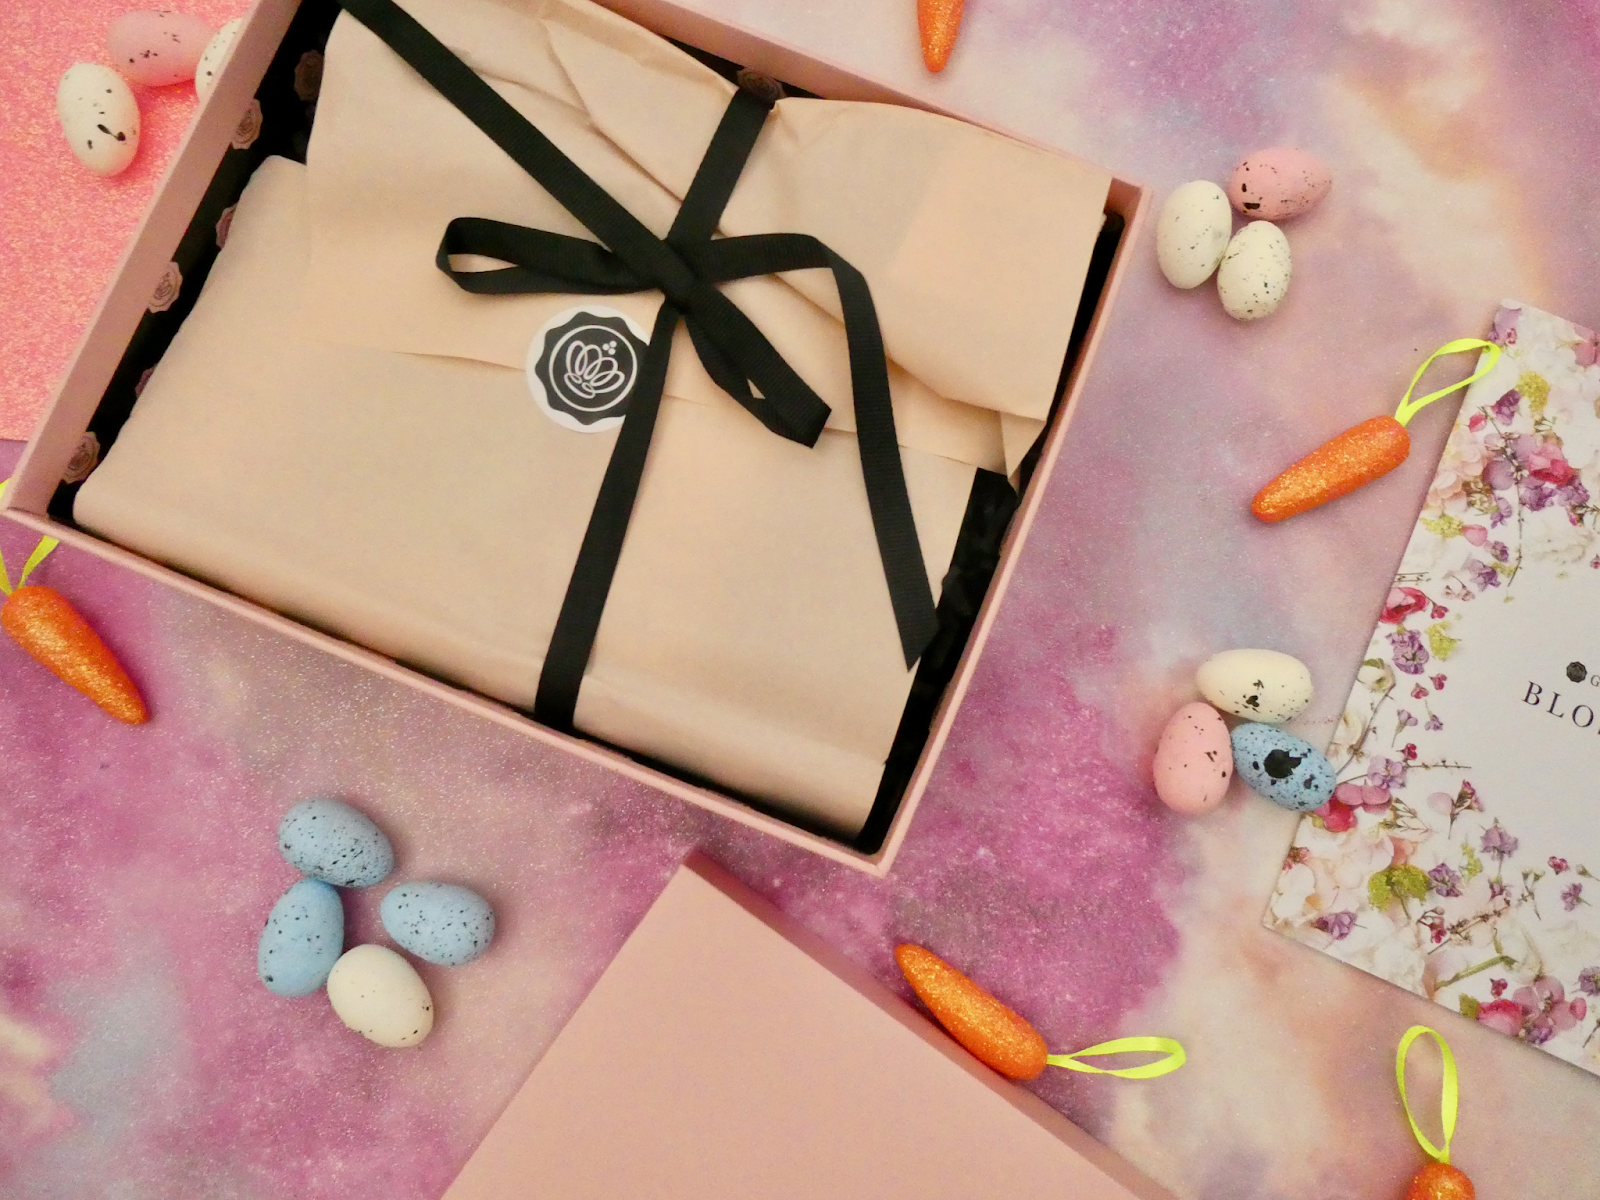 Glossybox 'Blossom' April 2020 | Unboxing & Review 